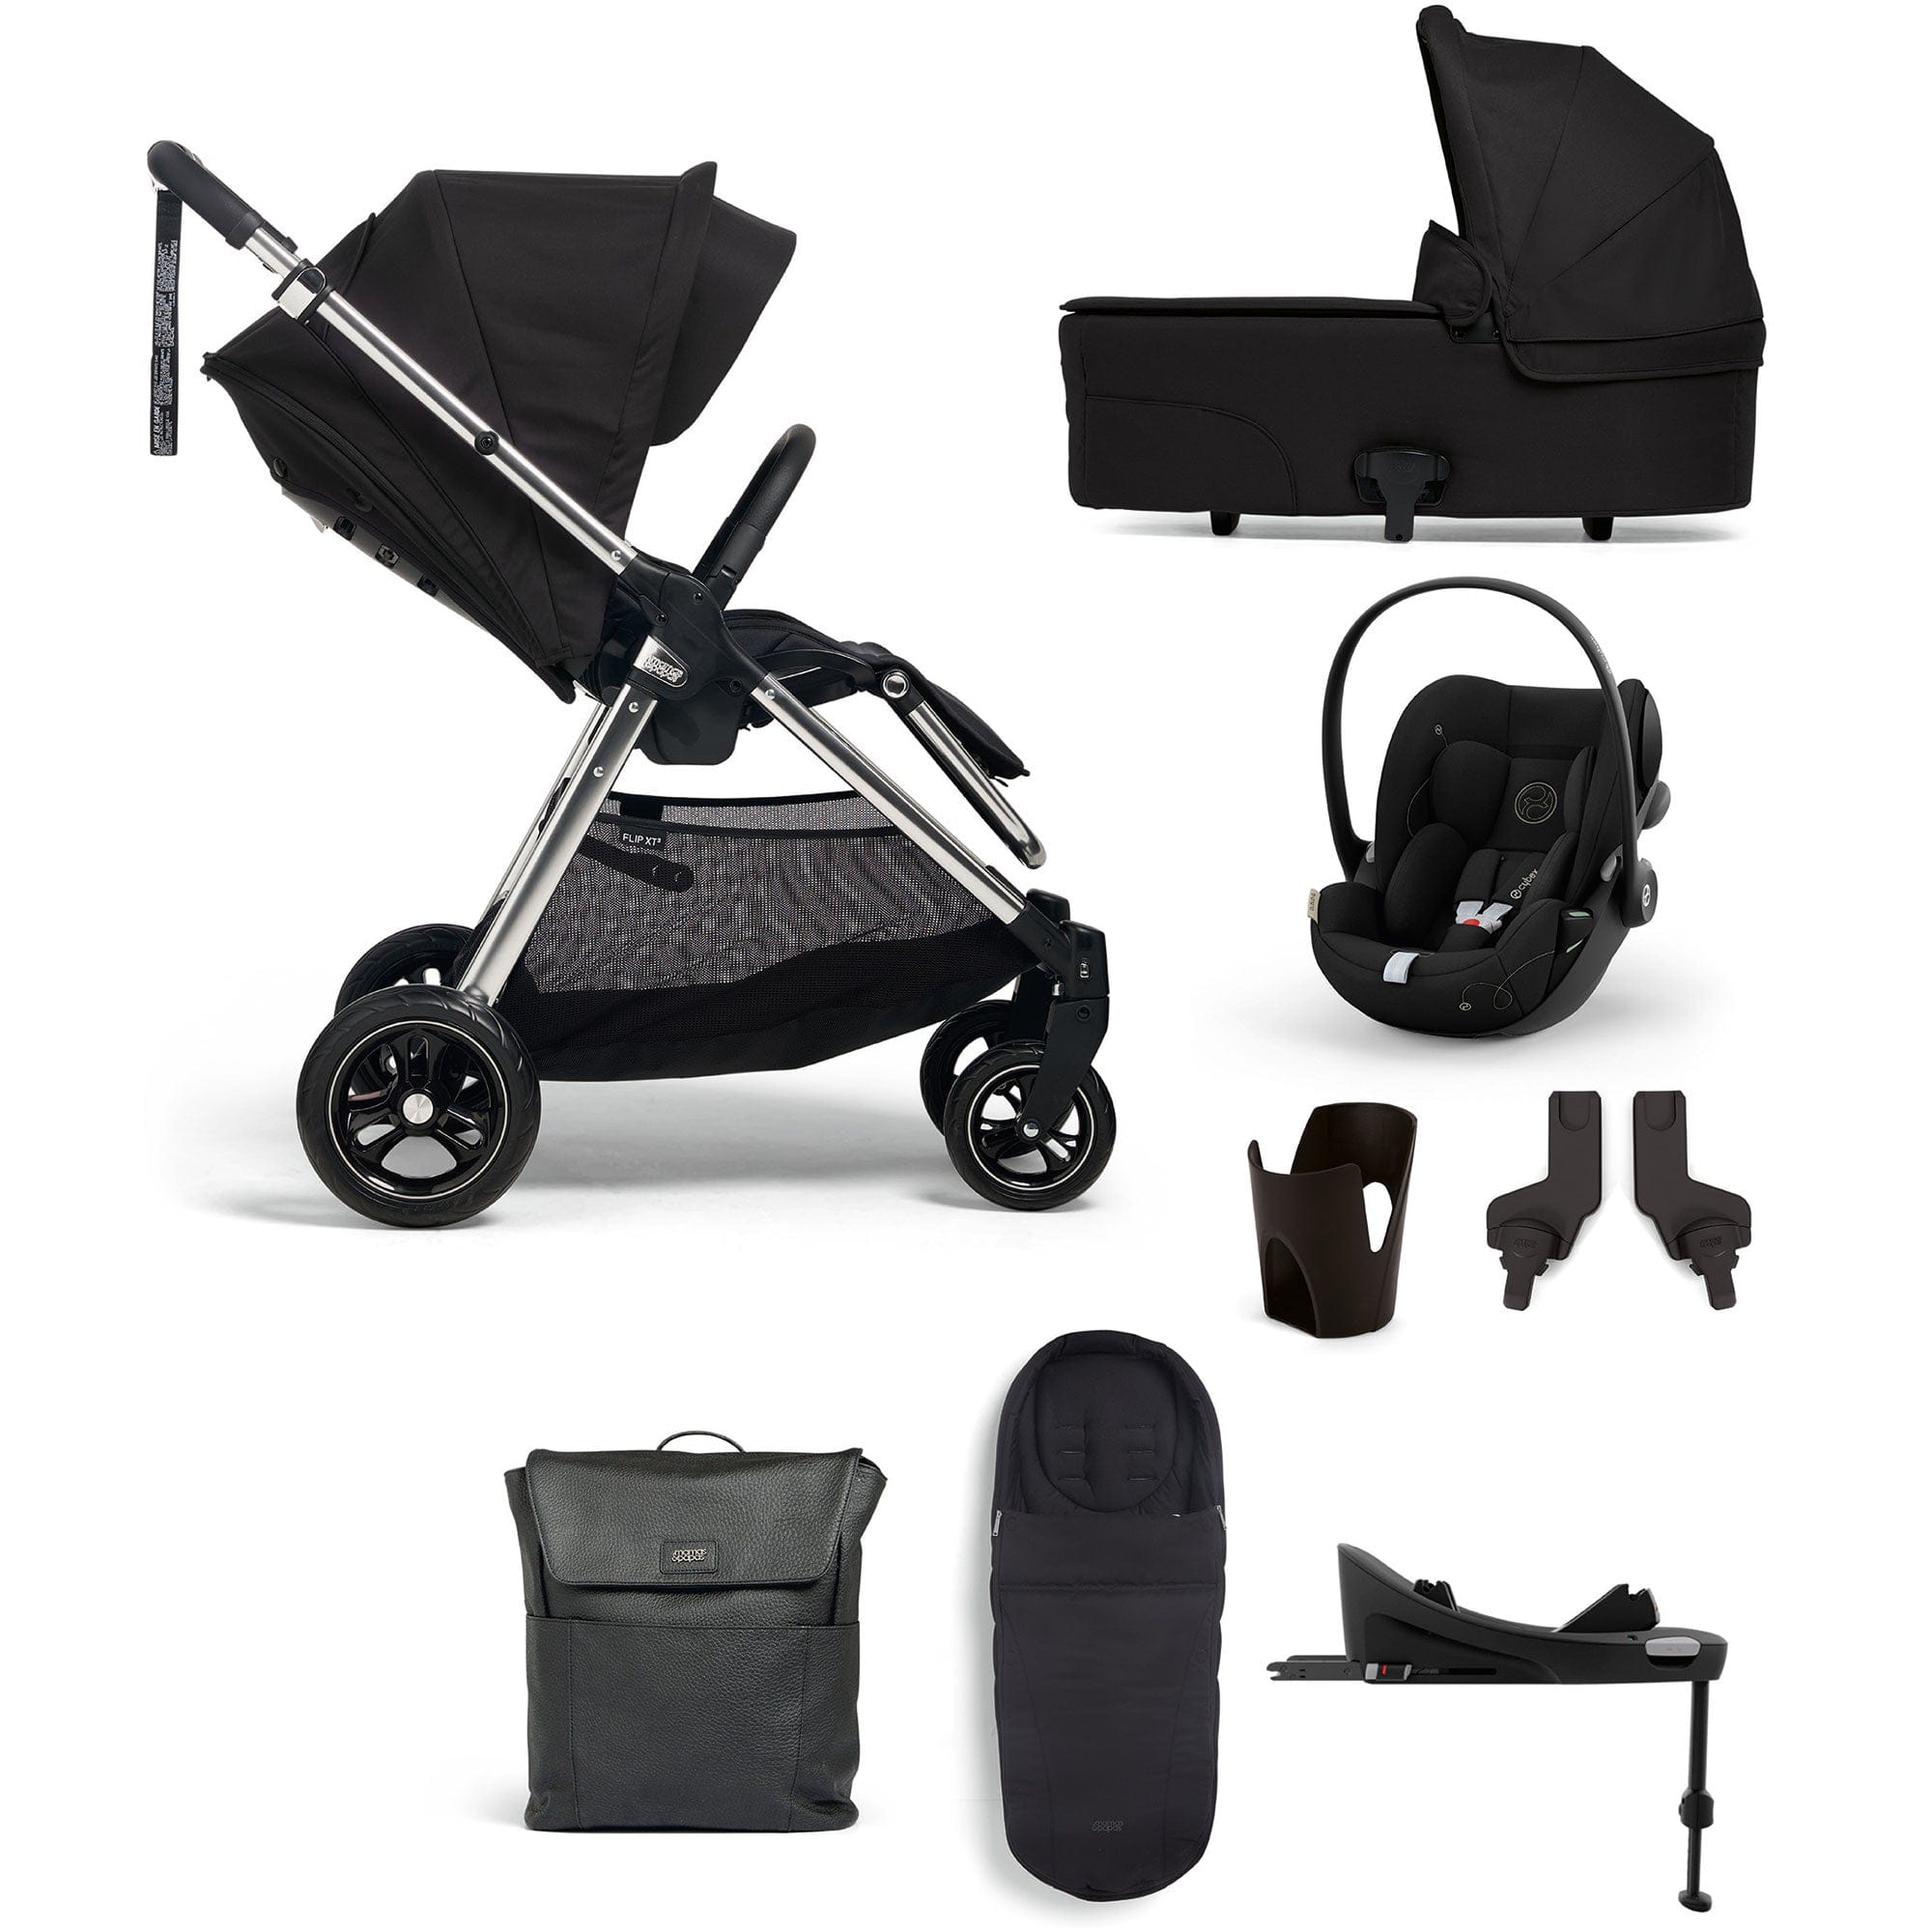 Mamas & Papas Flip XT³ 8 Piece Essentials Bundle with Car Seat in Slated Navy Travel Systems 61951SN00 5063229087479